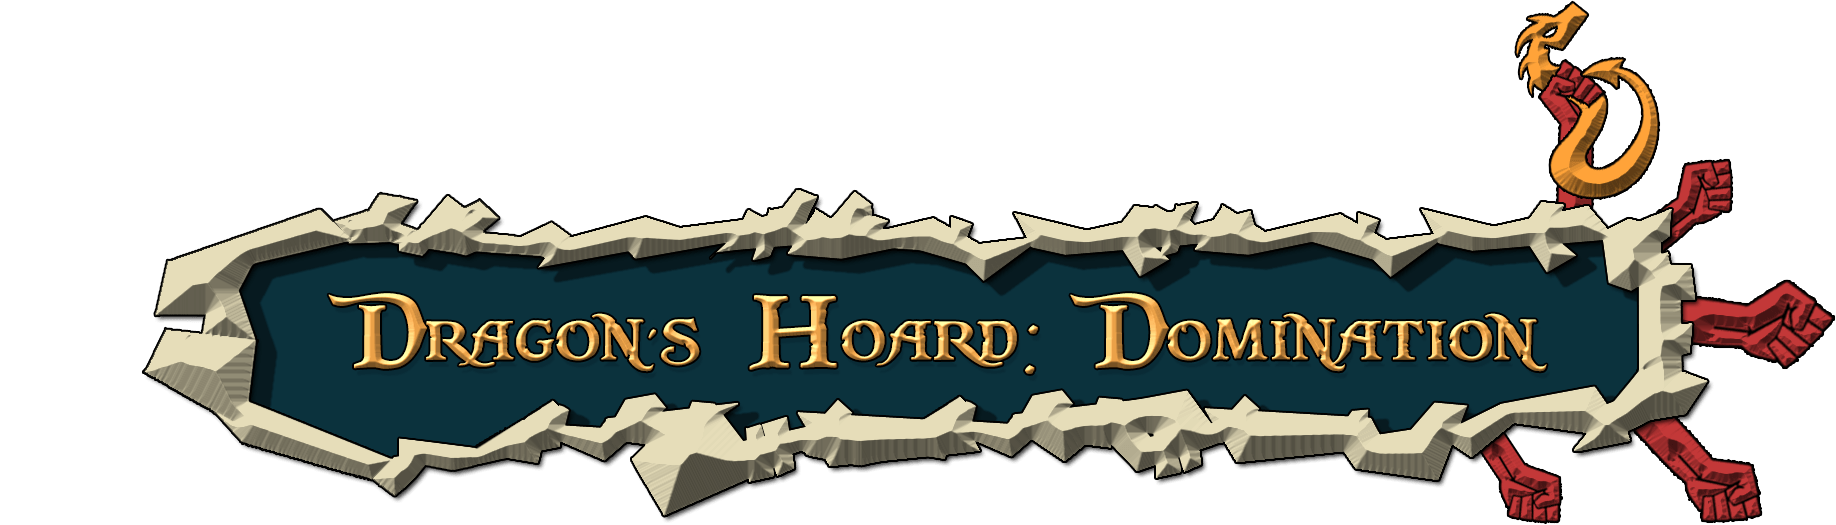 Planet Forge Games Dragon Hoard Domination RPG Sidescrolling